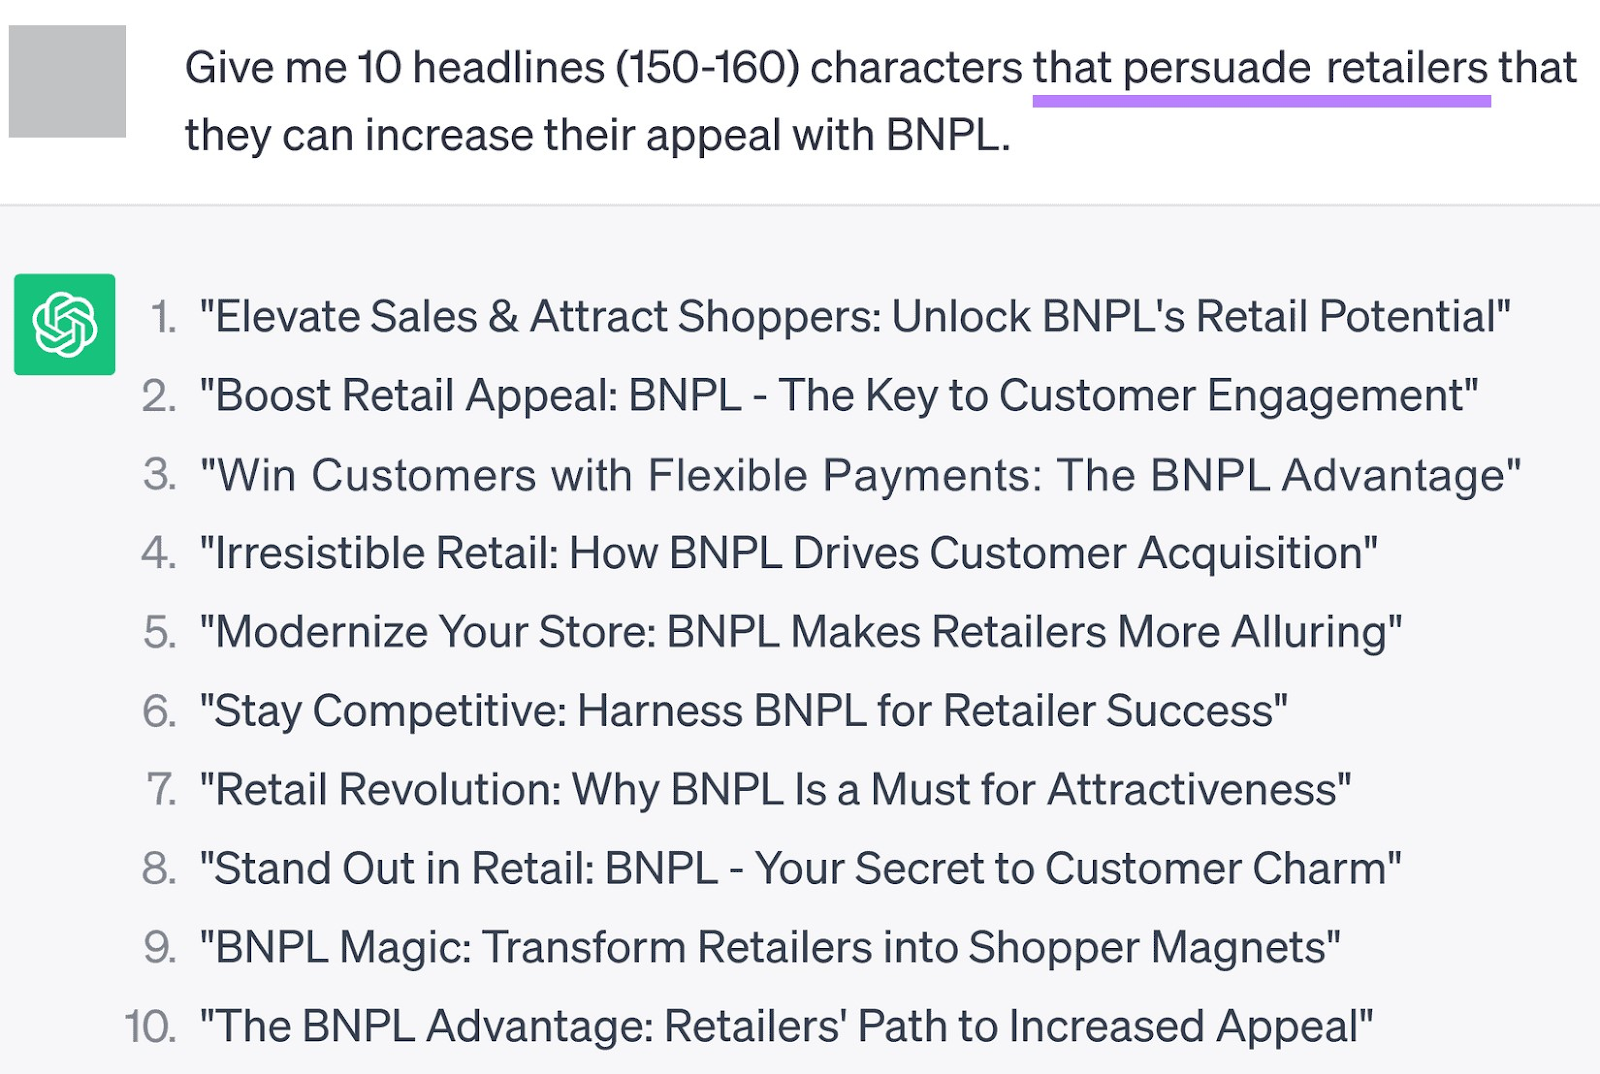 A prompt asking ChatGPT to generate 10 attention-grabbing headlines "that persuade retailers"